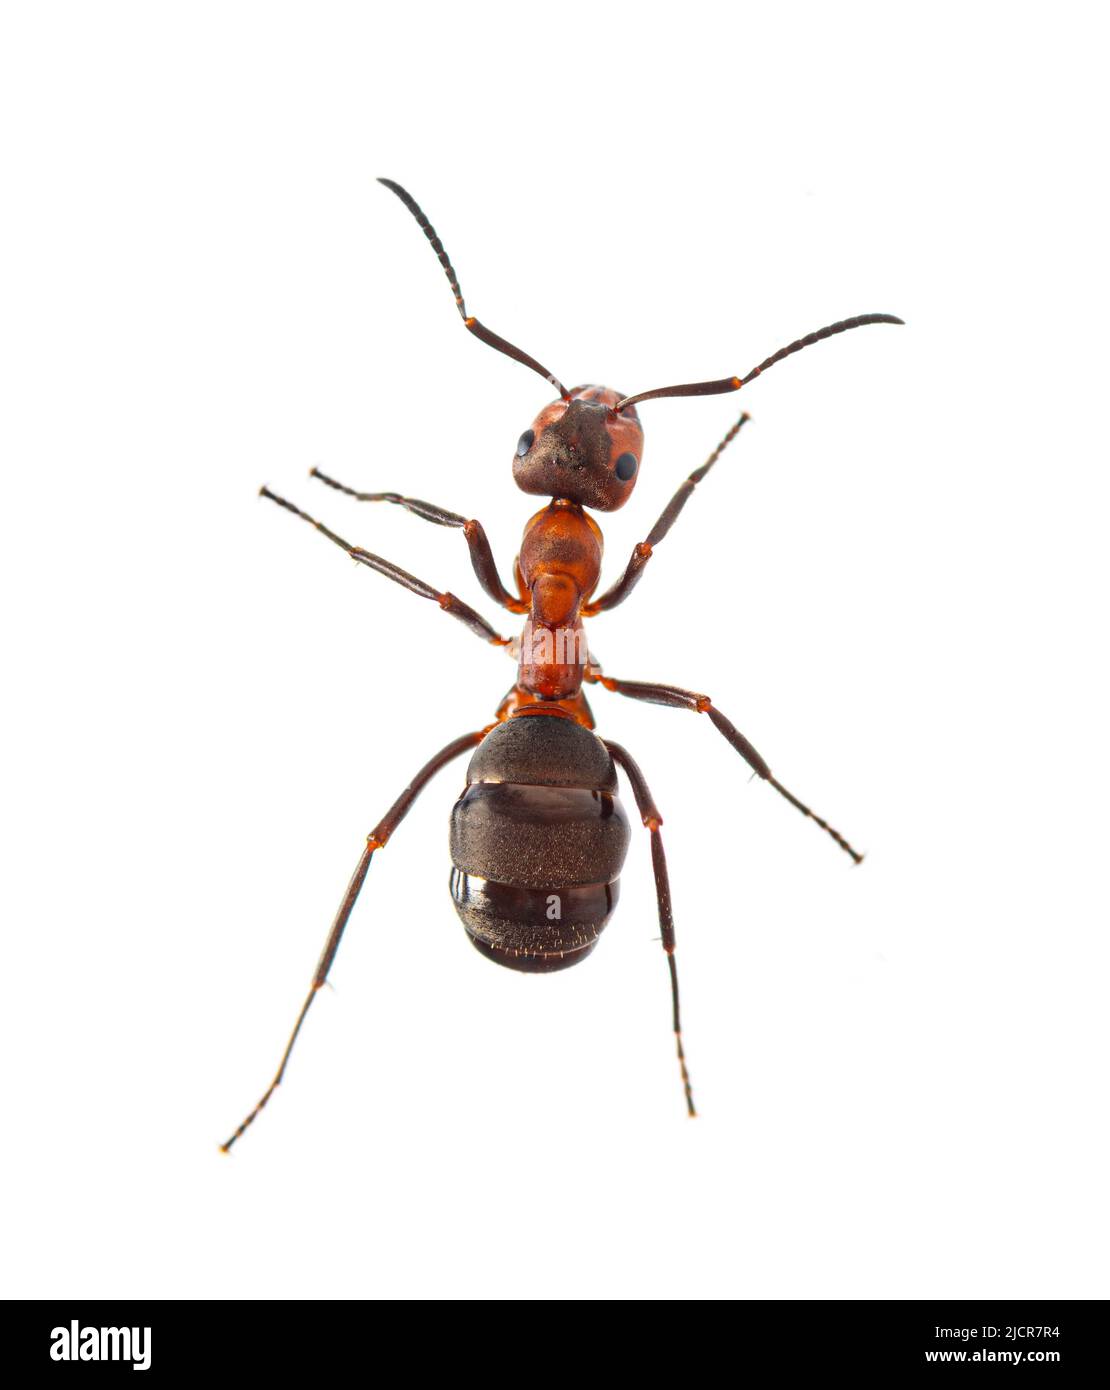 Red wood ant - Formica rufa or southern wood ant, isolated on white Stock Photo